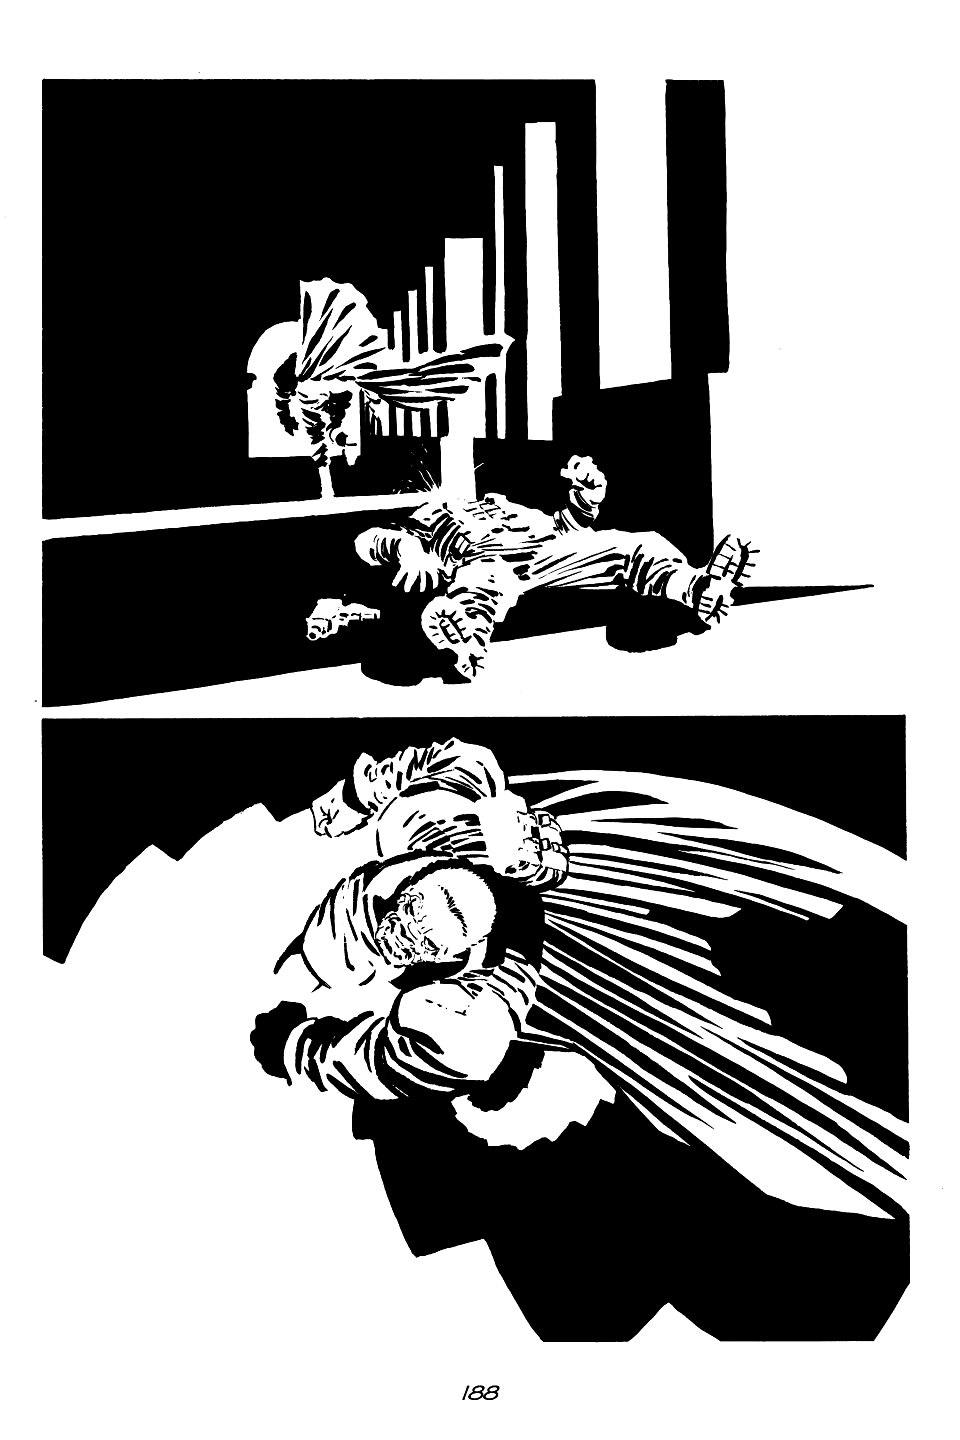 page 188 of sin city 1 the hard goodbye